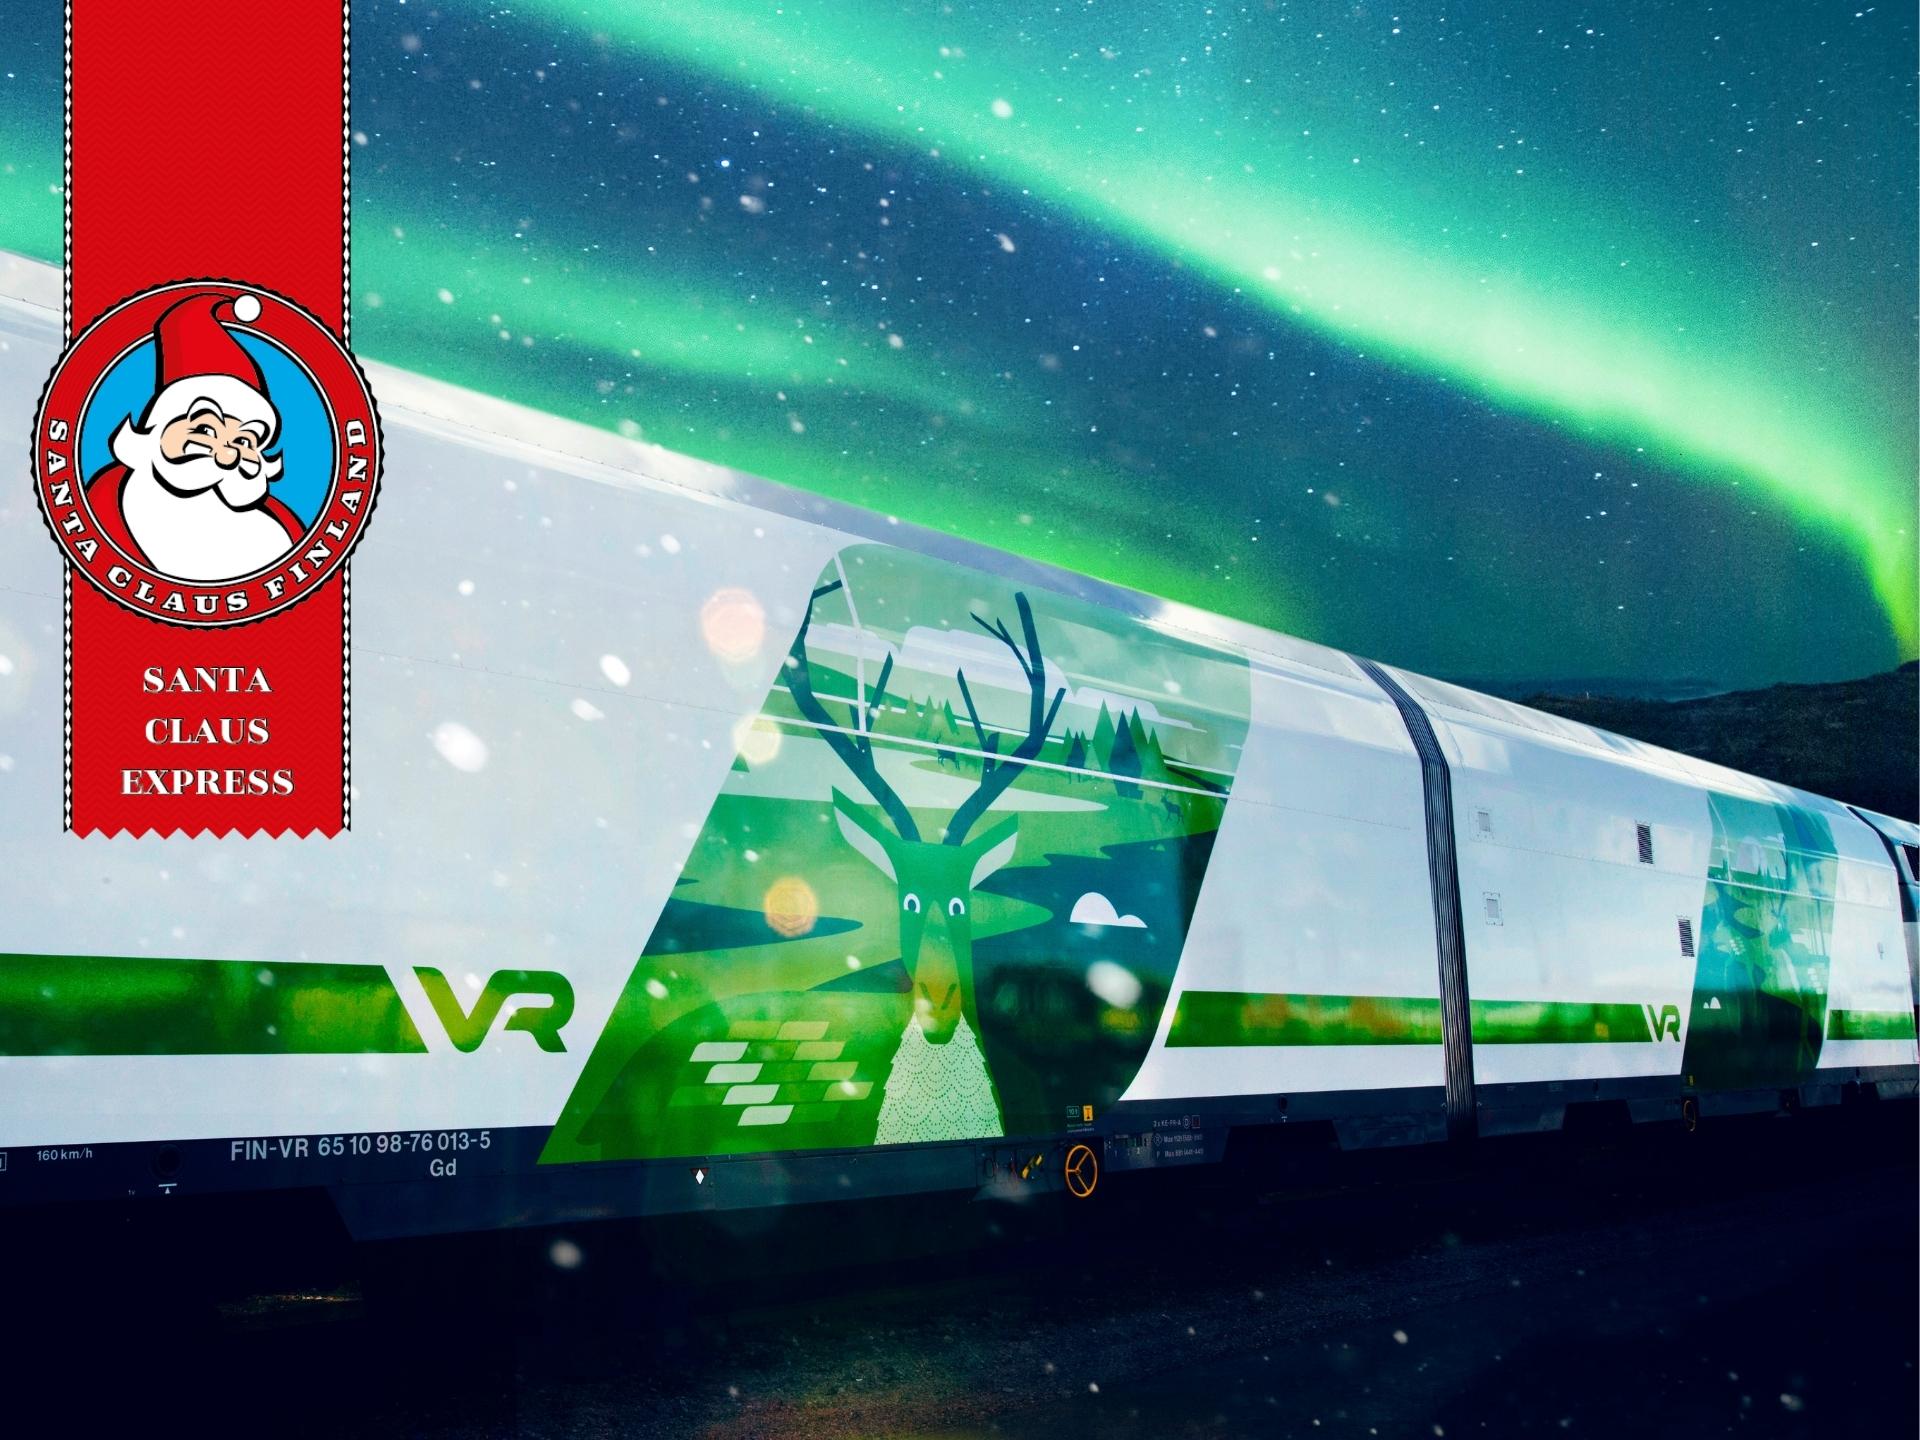 Santa Claus Express Finland, the route to winter wonderland - VR